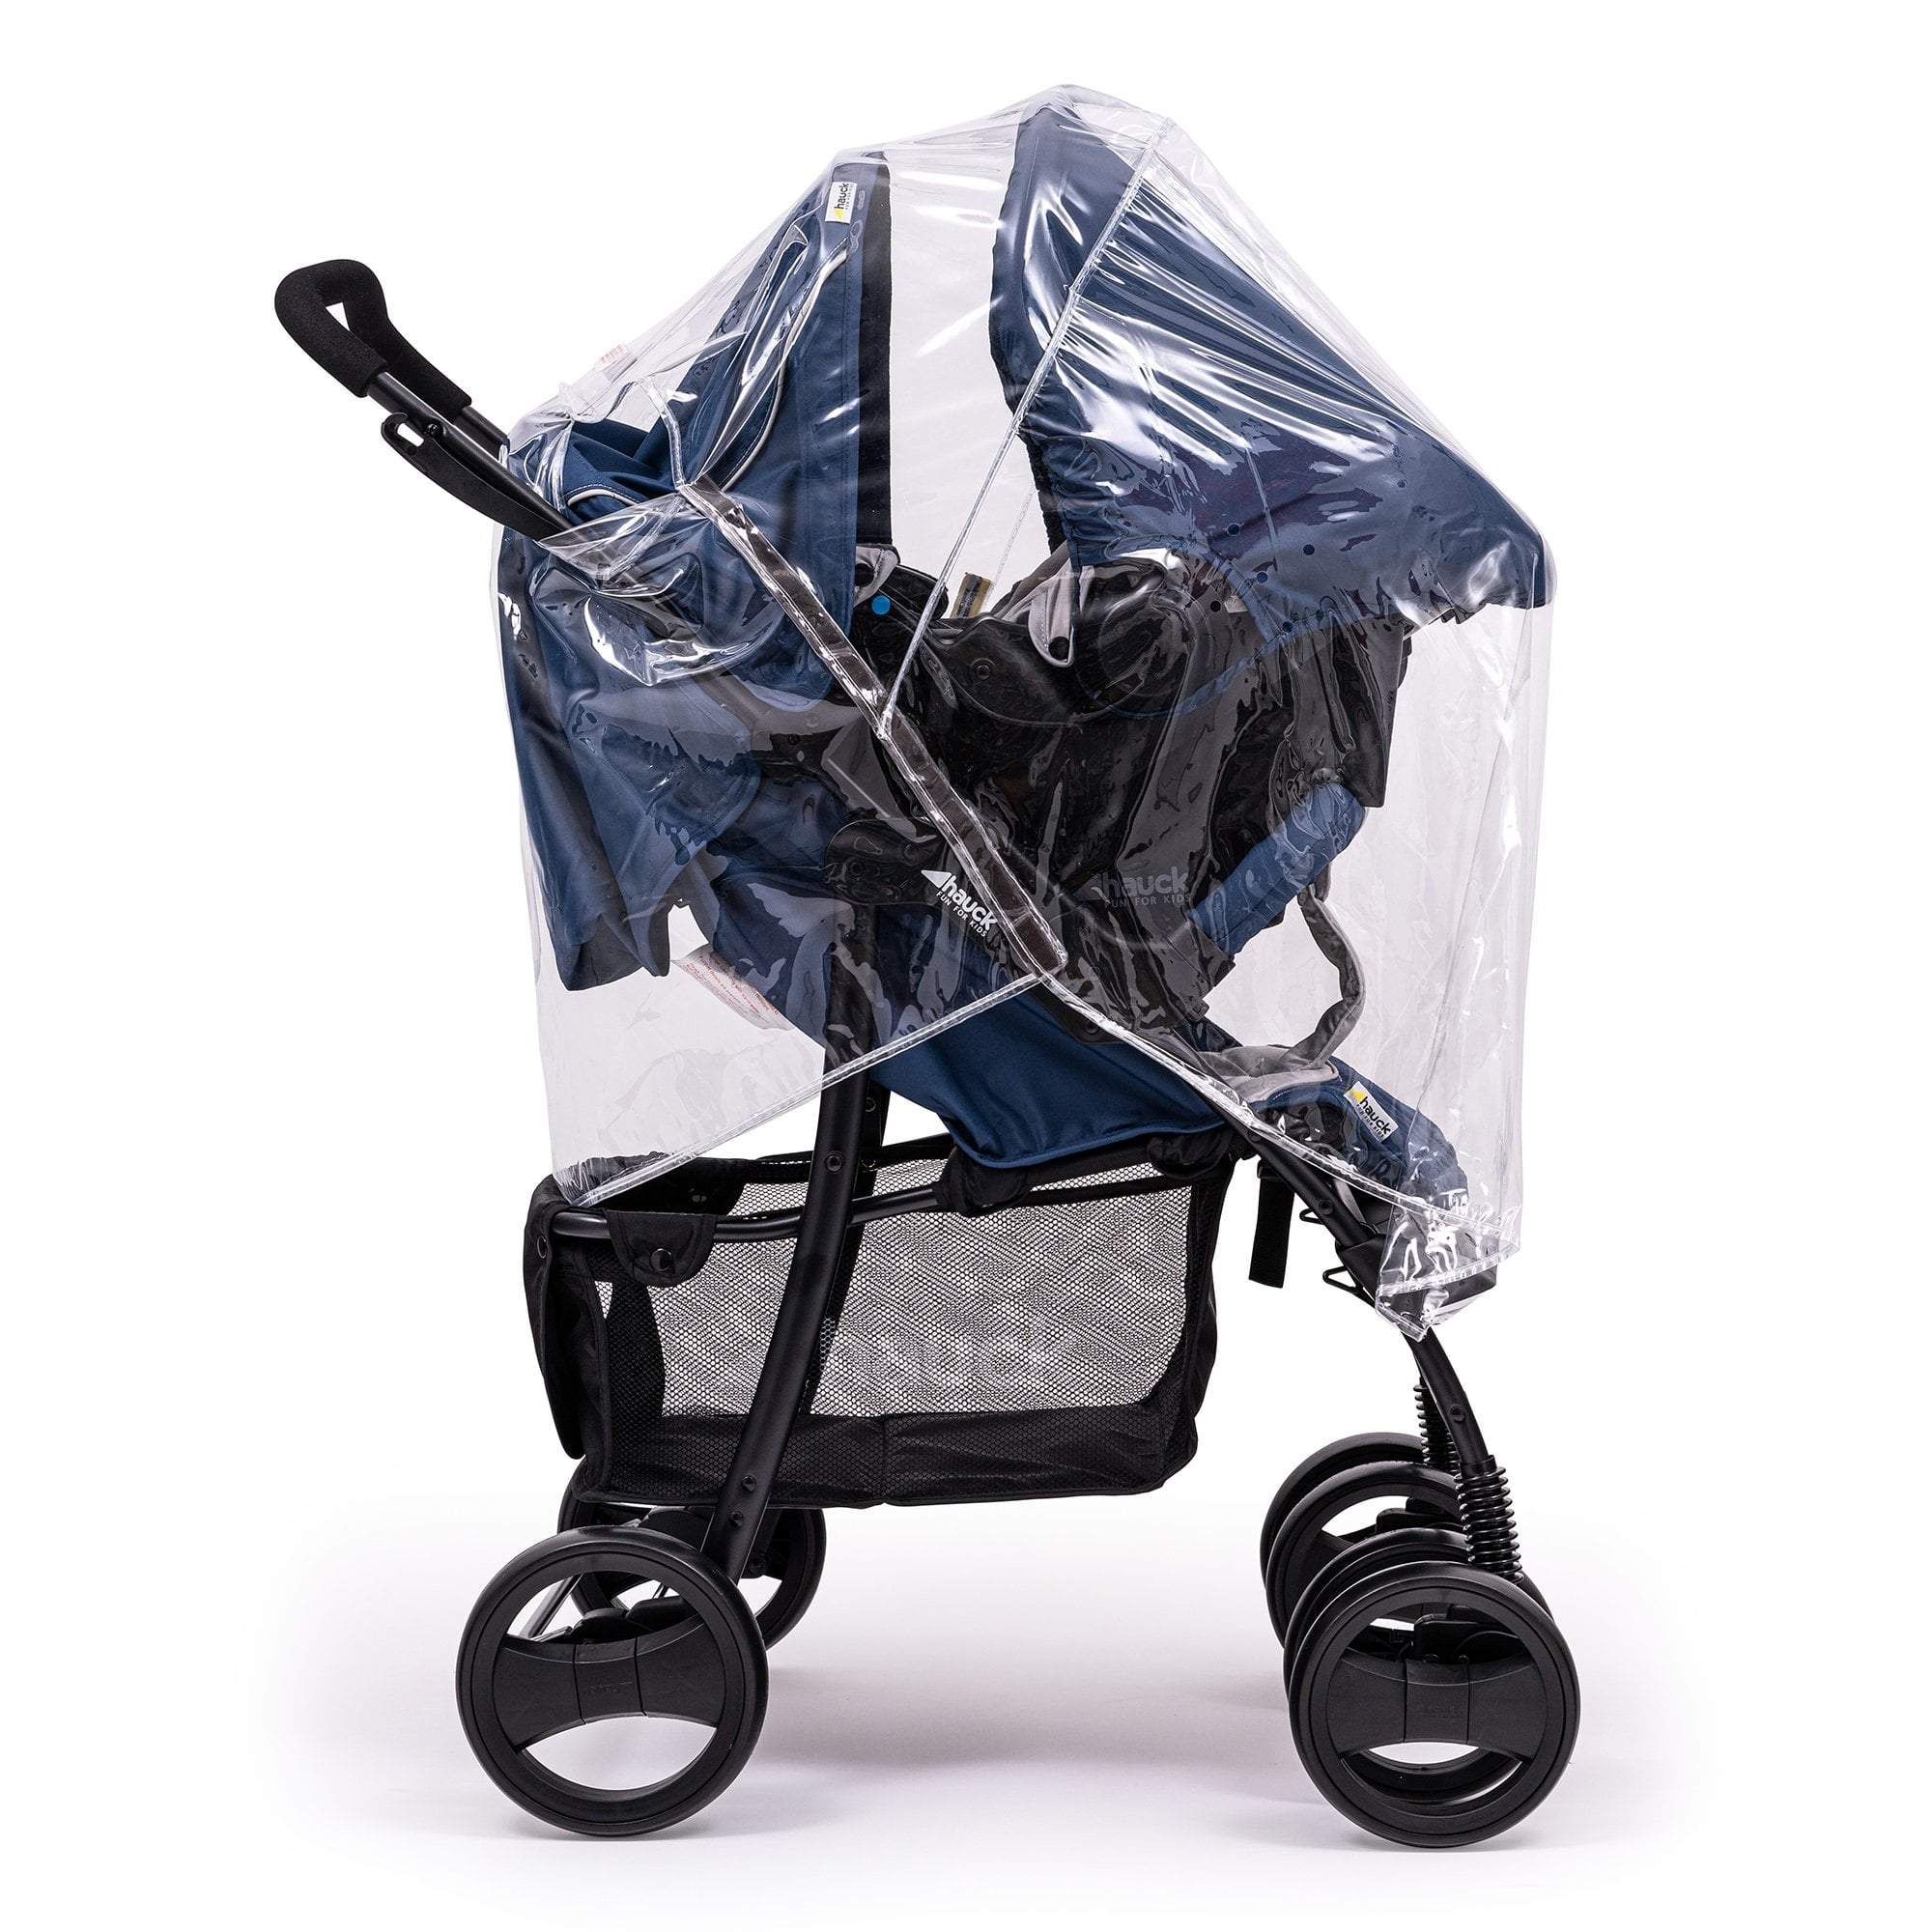 Travel System Raincover Compatible with Red Castle - Fits All Models - For Your Little One